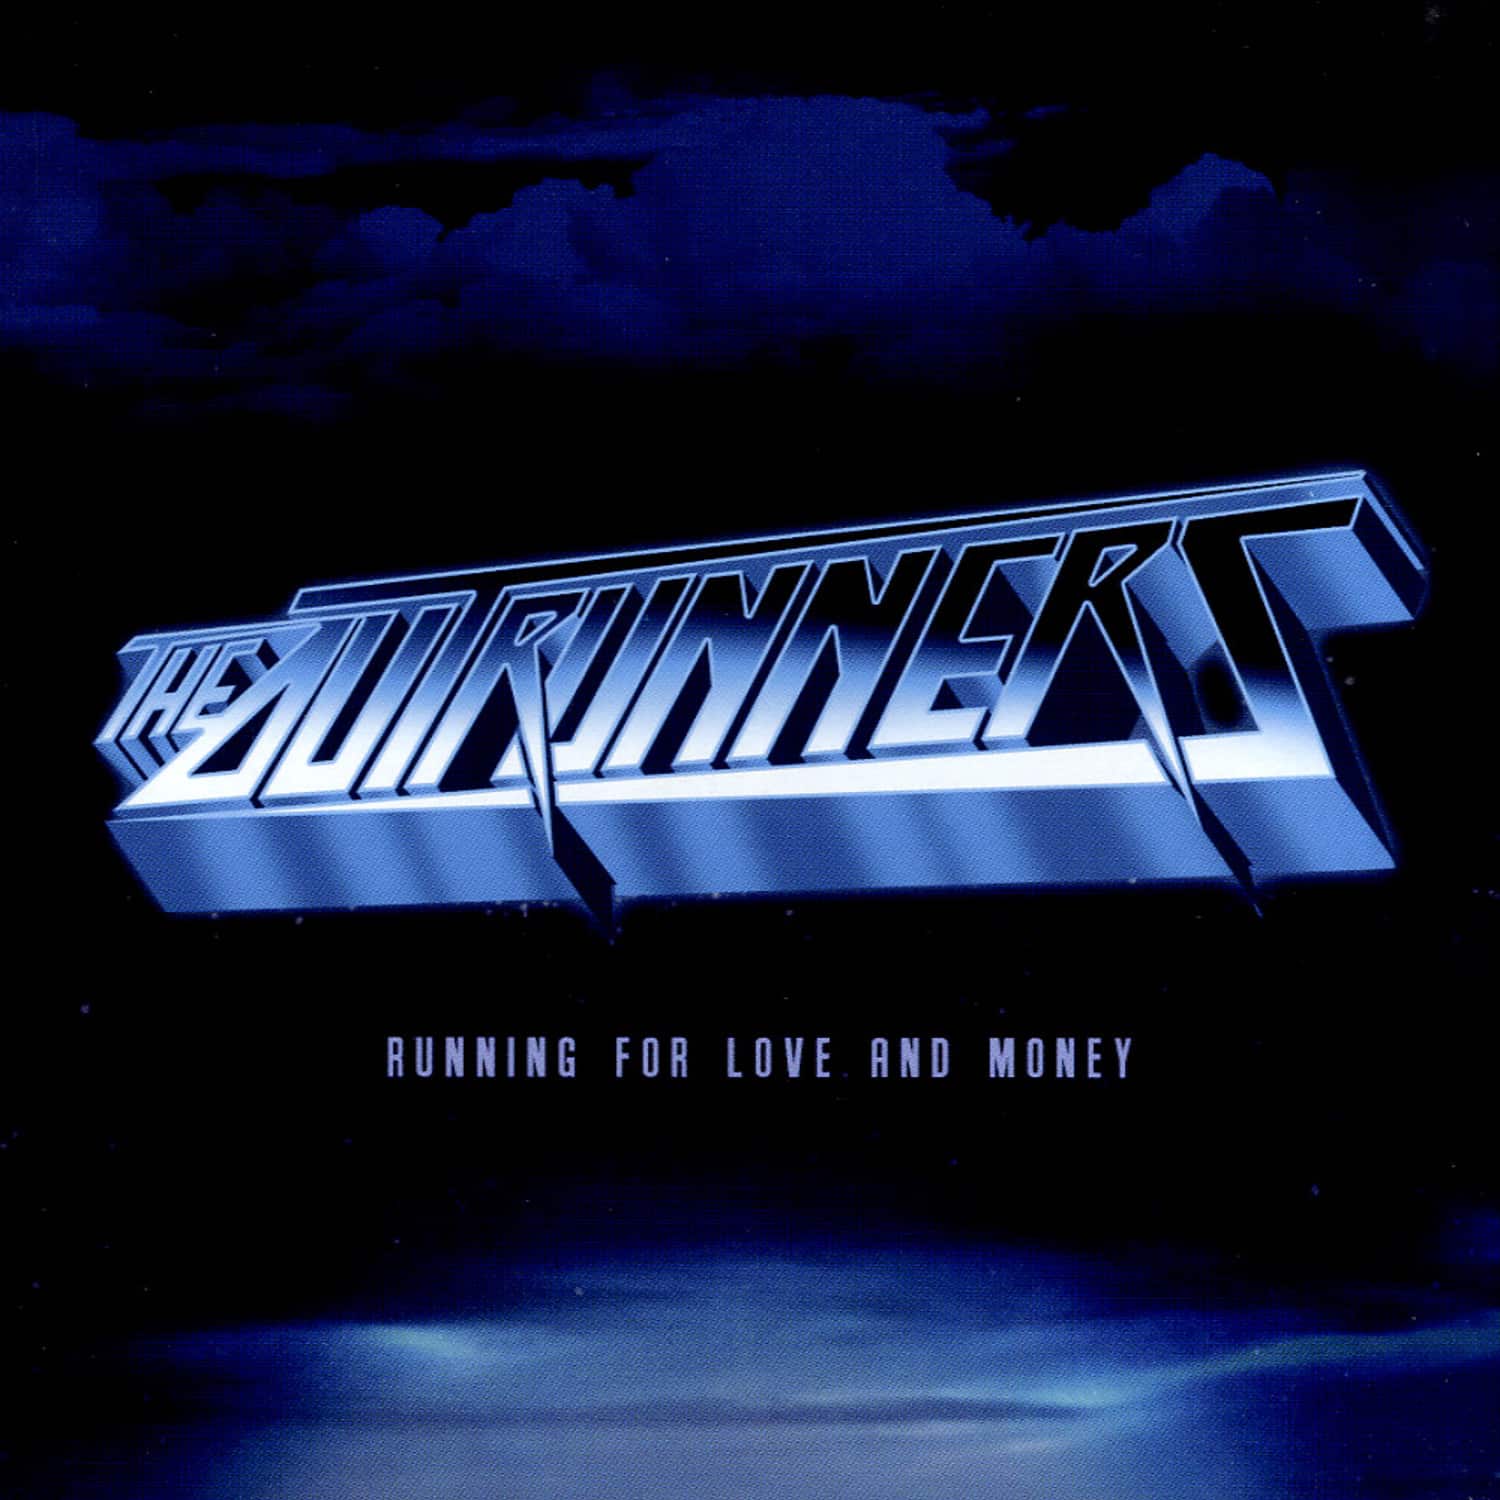 The Outrunners - RUNNING FOR LOVE AND MONEY